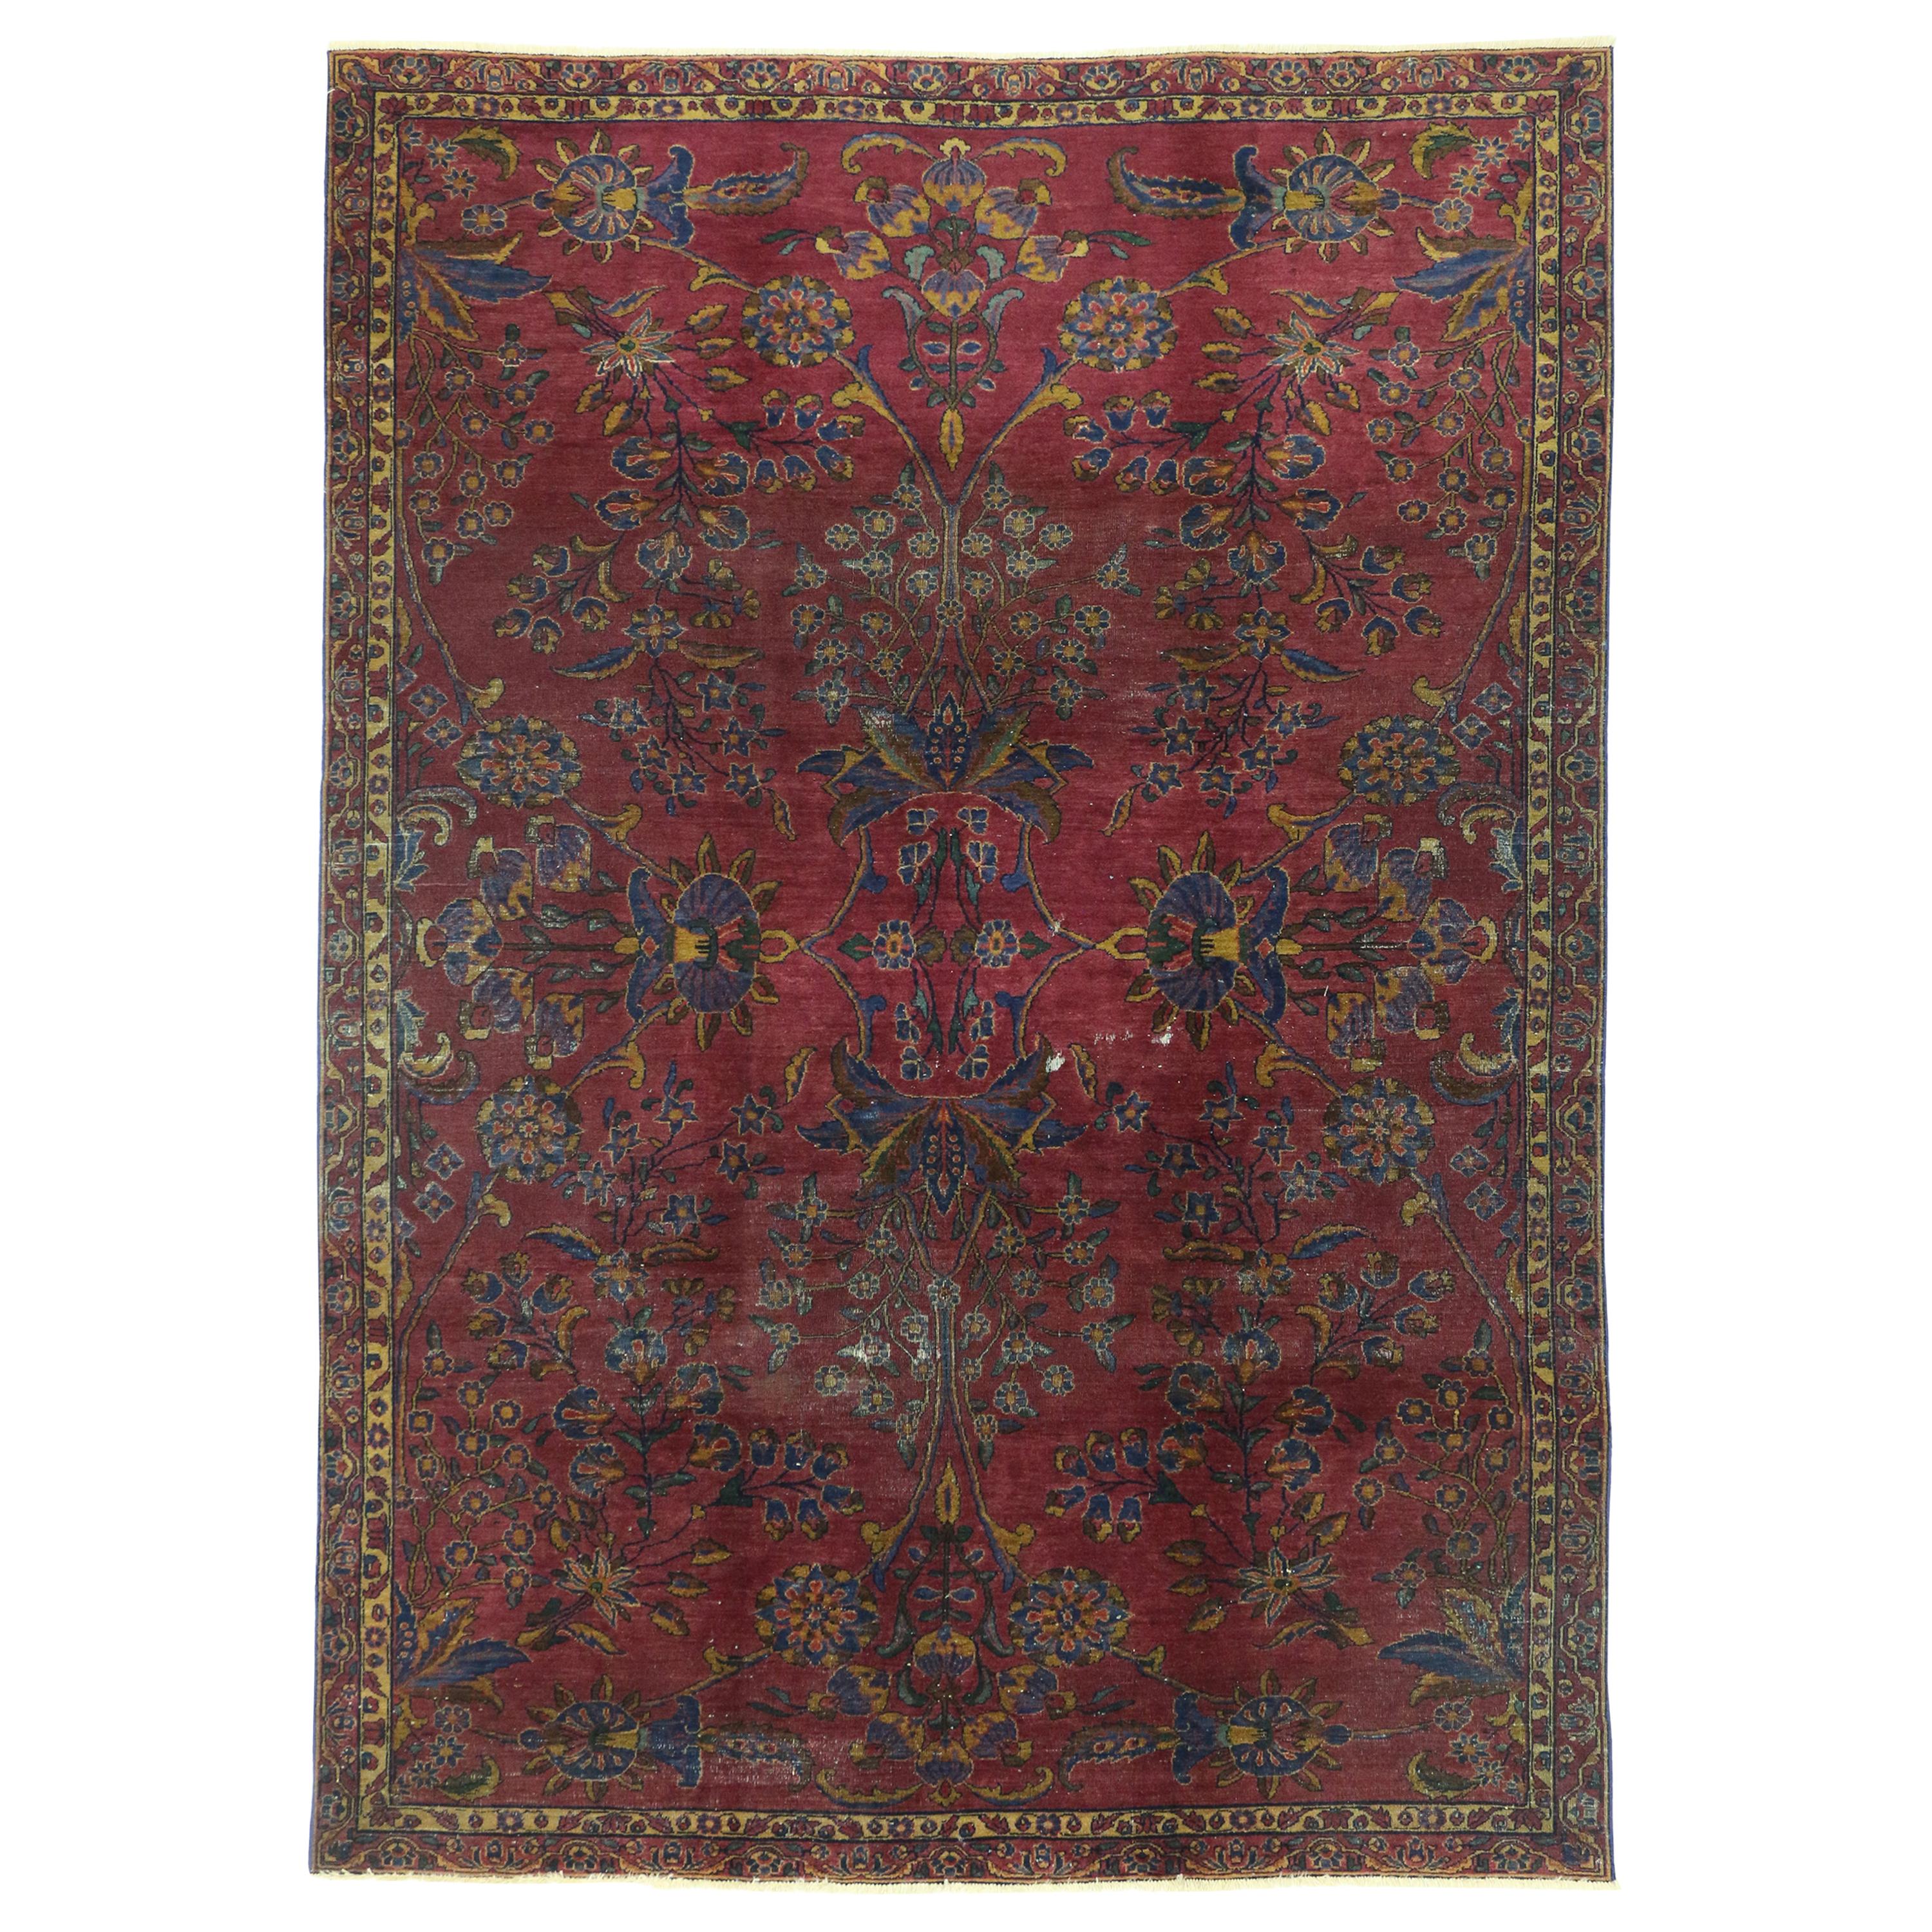 Distressed Burgundy Antique Indian Area Rug with Old World Venetian Style For Sale